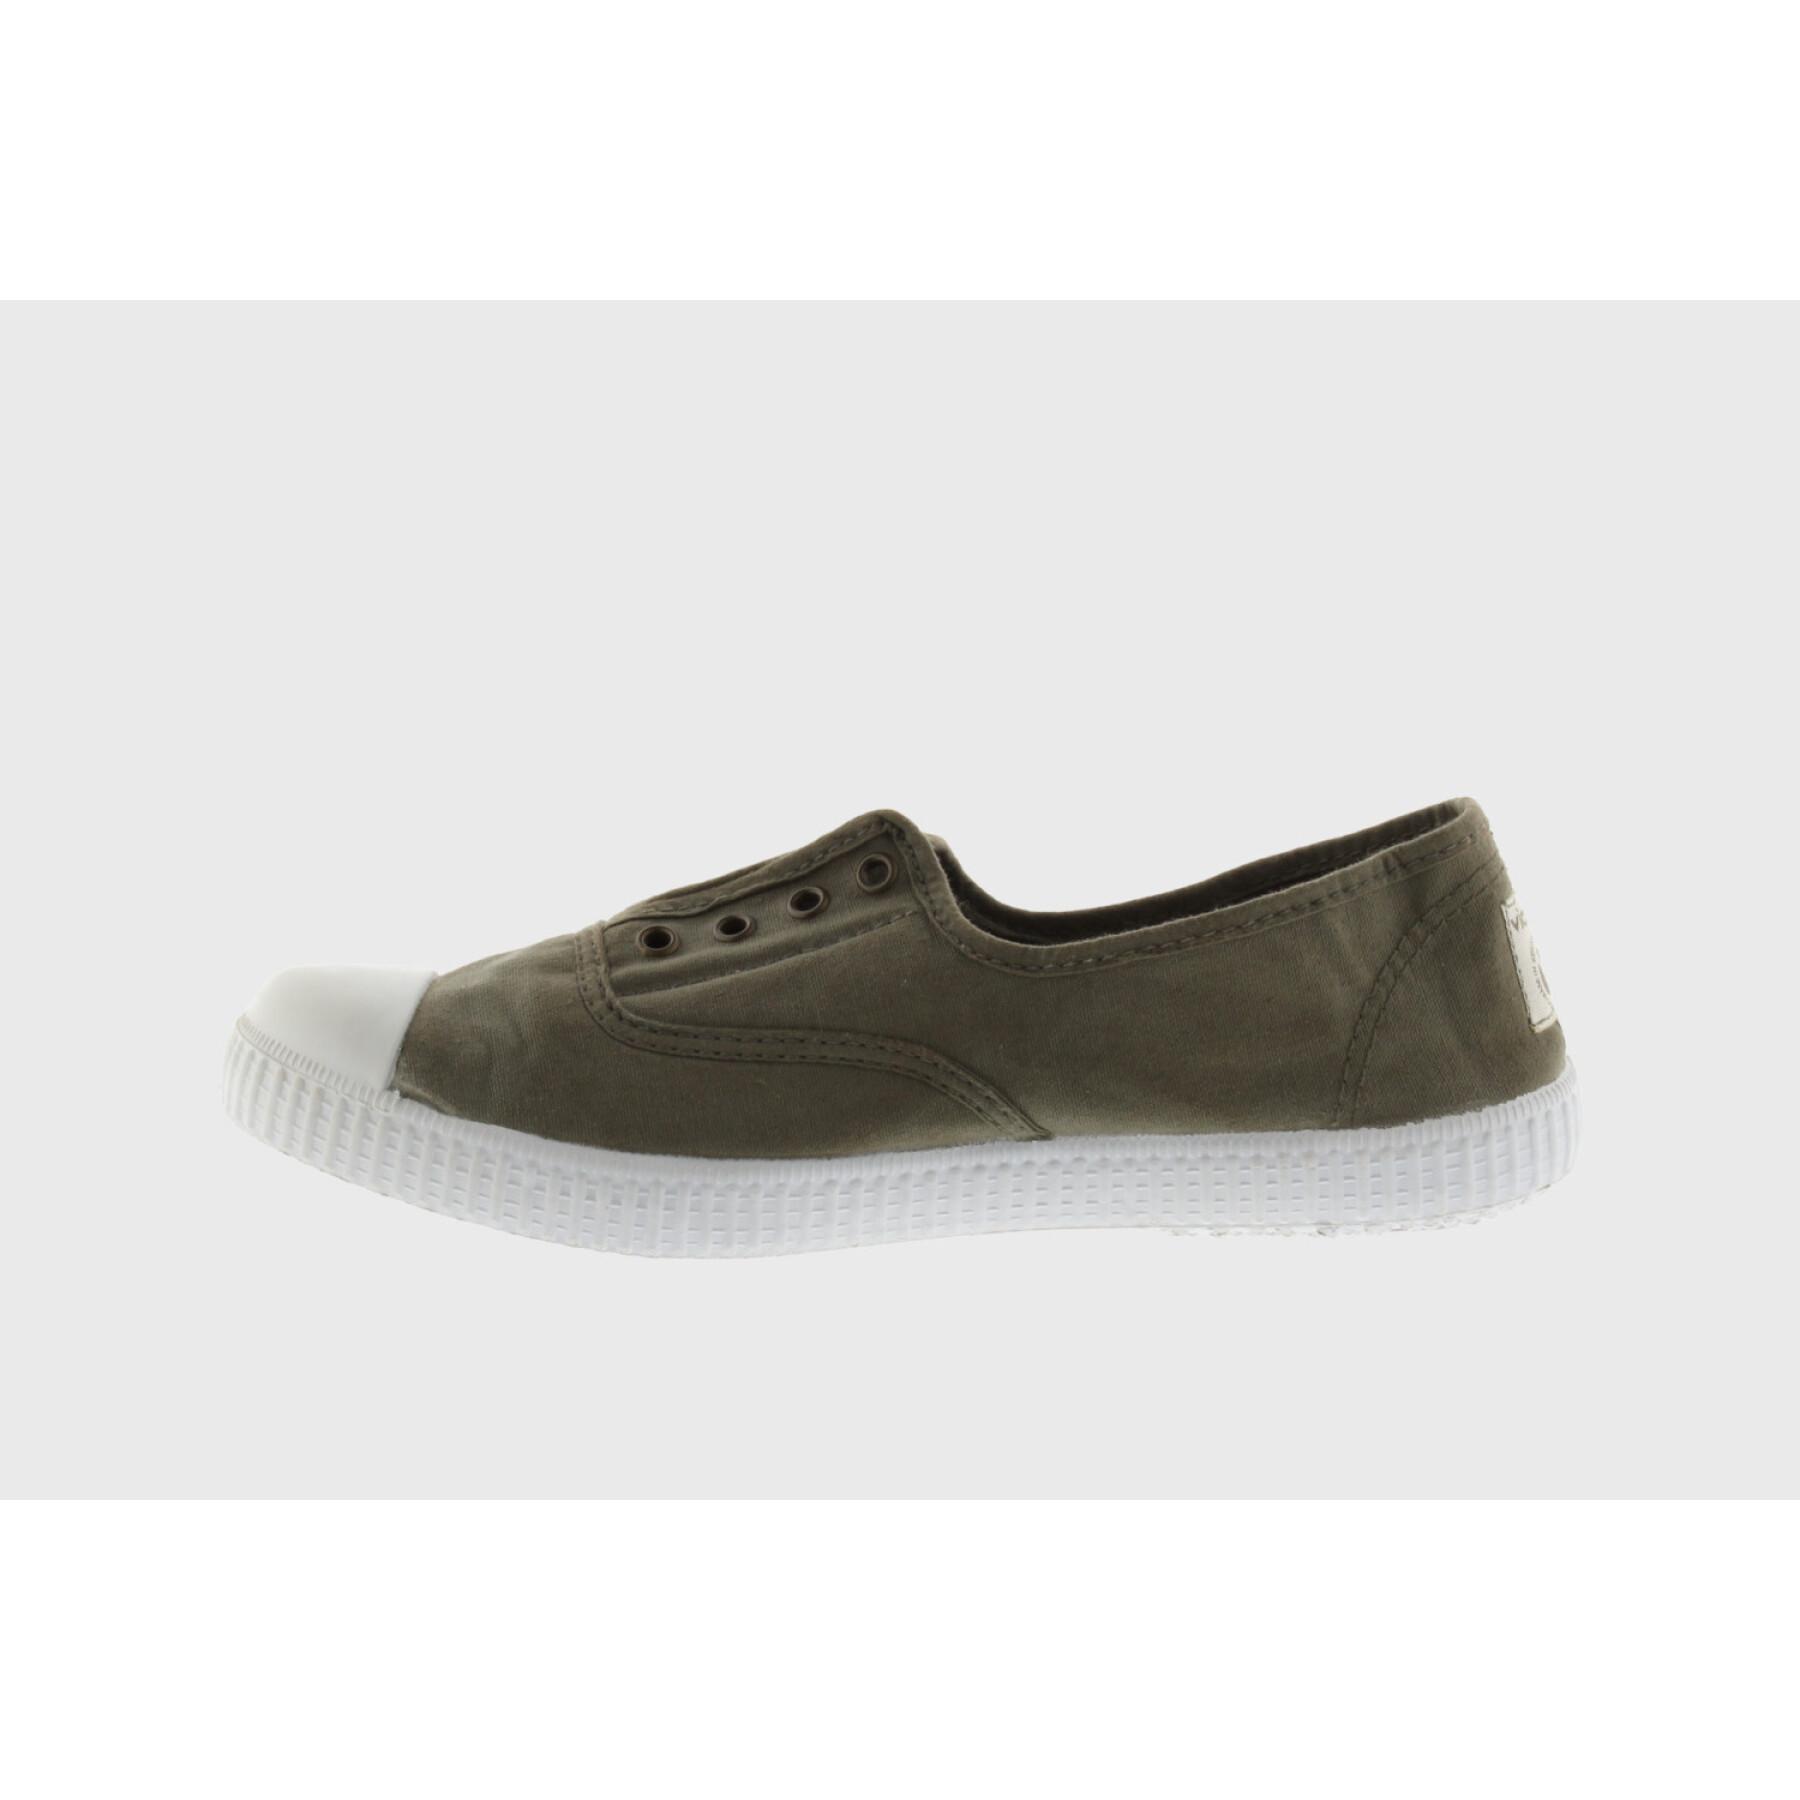 Women's shoes Victoria 1915 anglaise